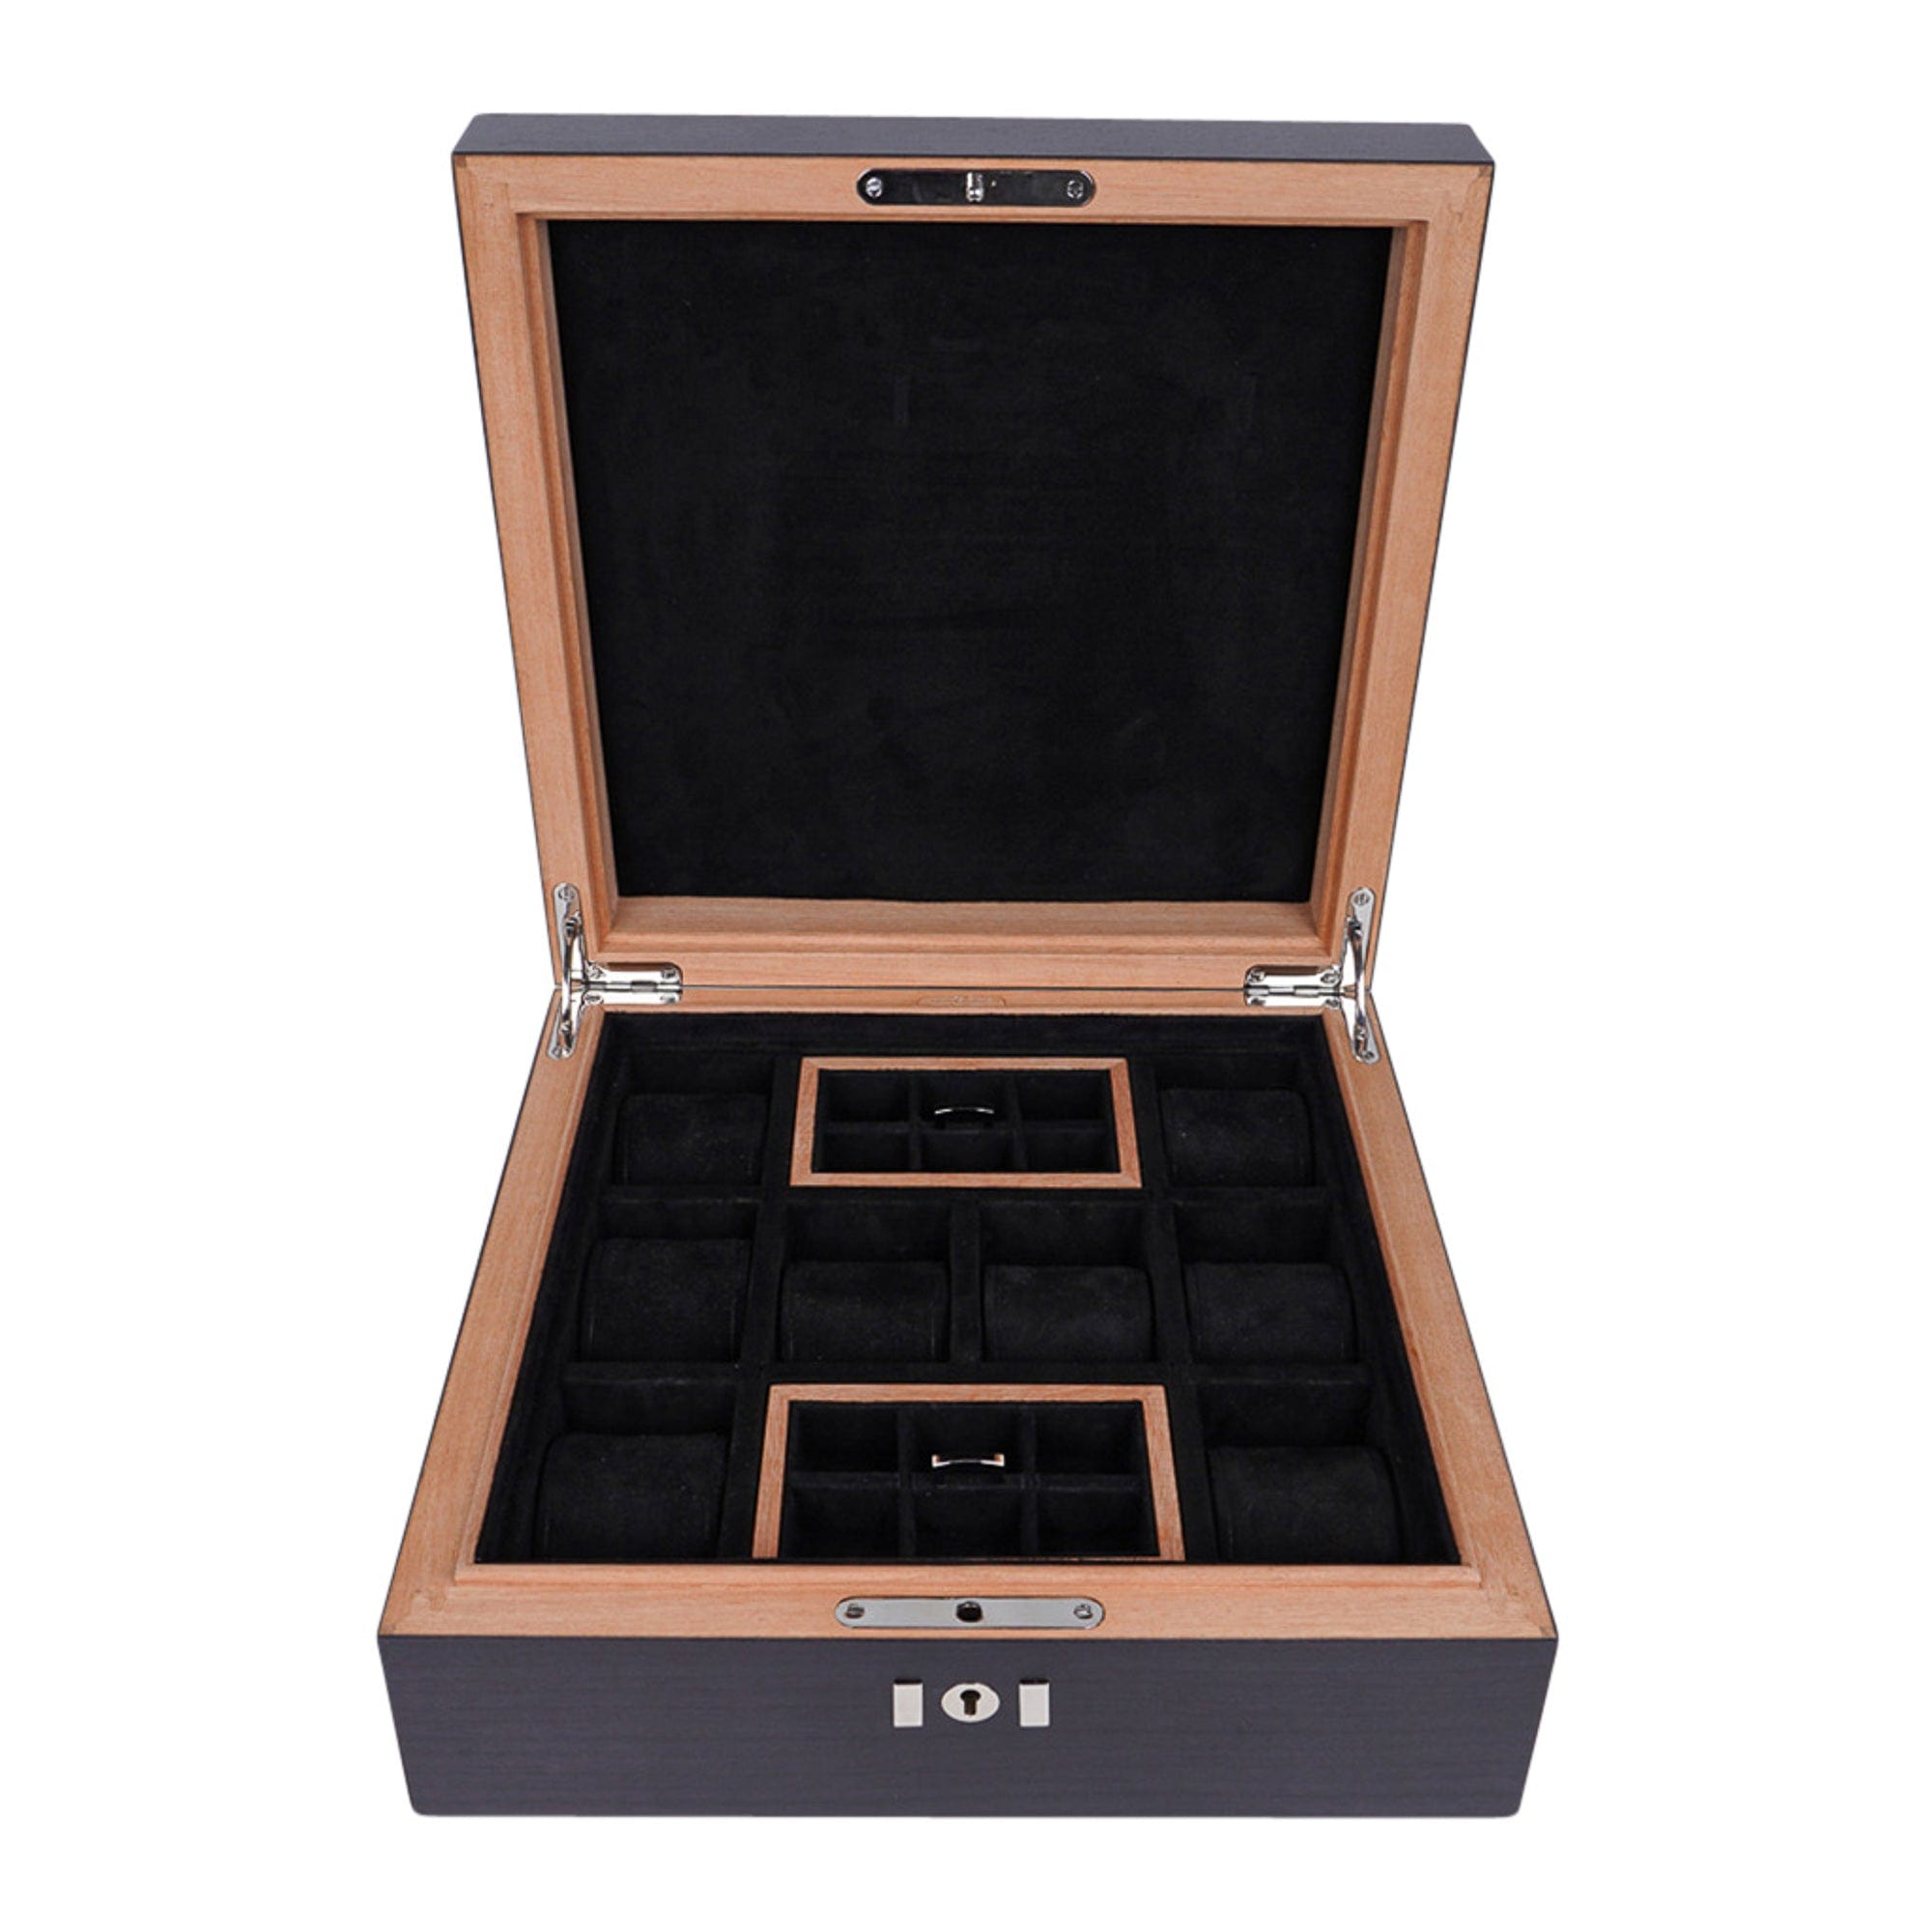 Hermes B09 Luxurious Large Mahogany Wood Box for 2 Watches New